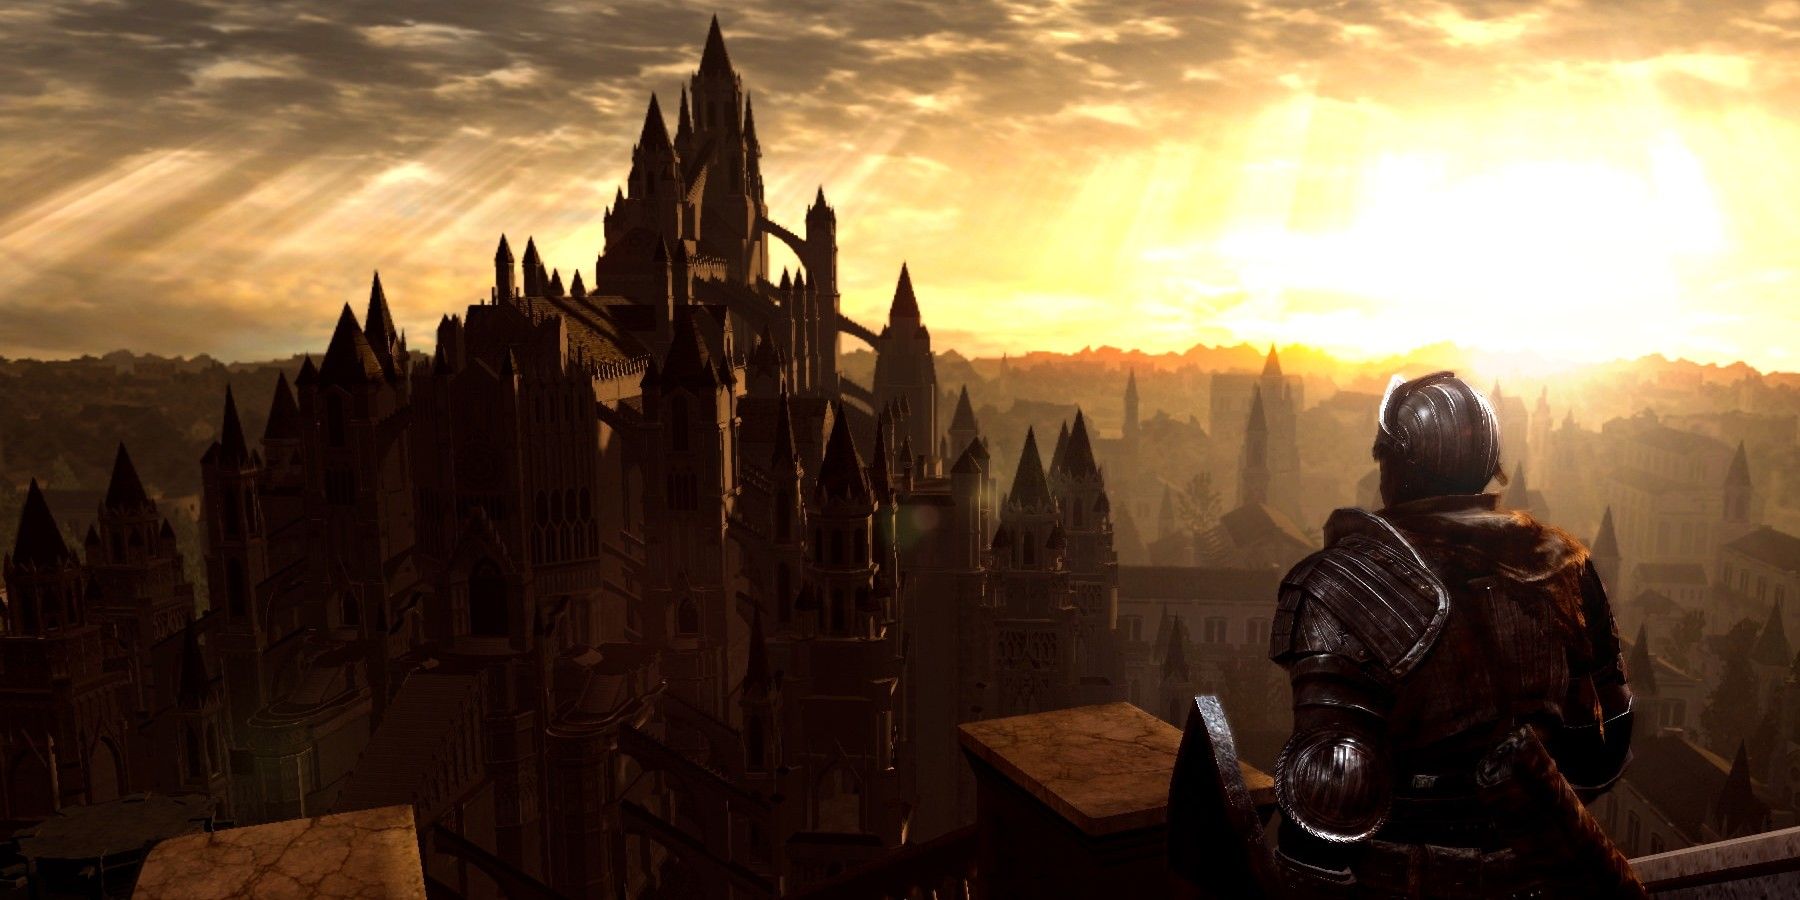 Dark Souls Anor Londo with Character